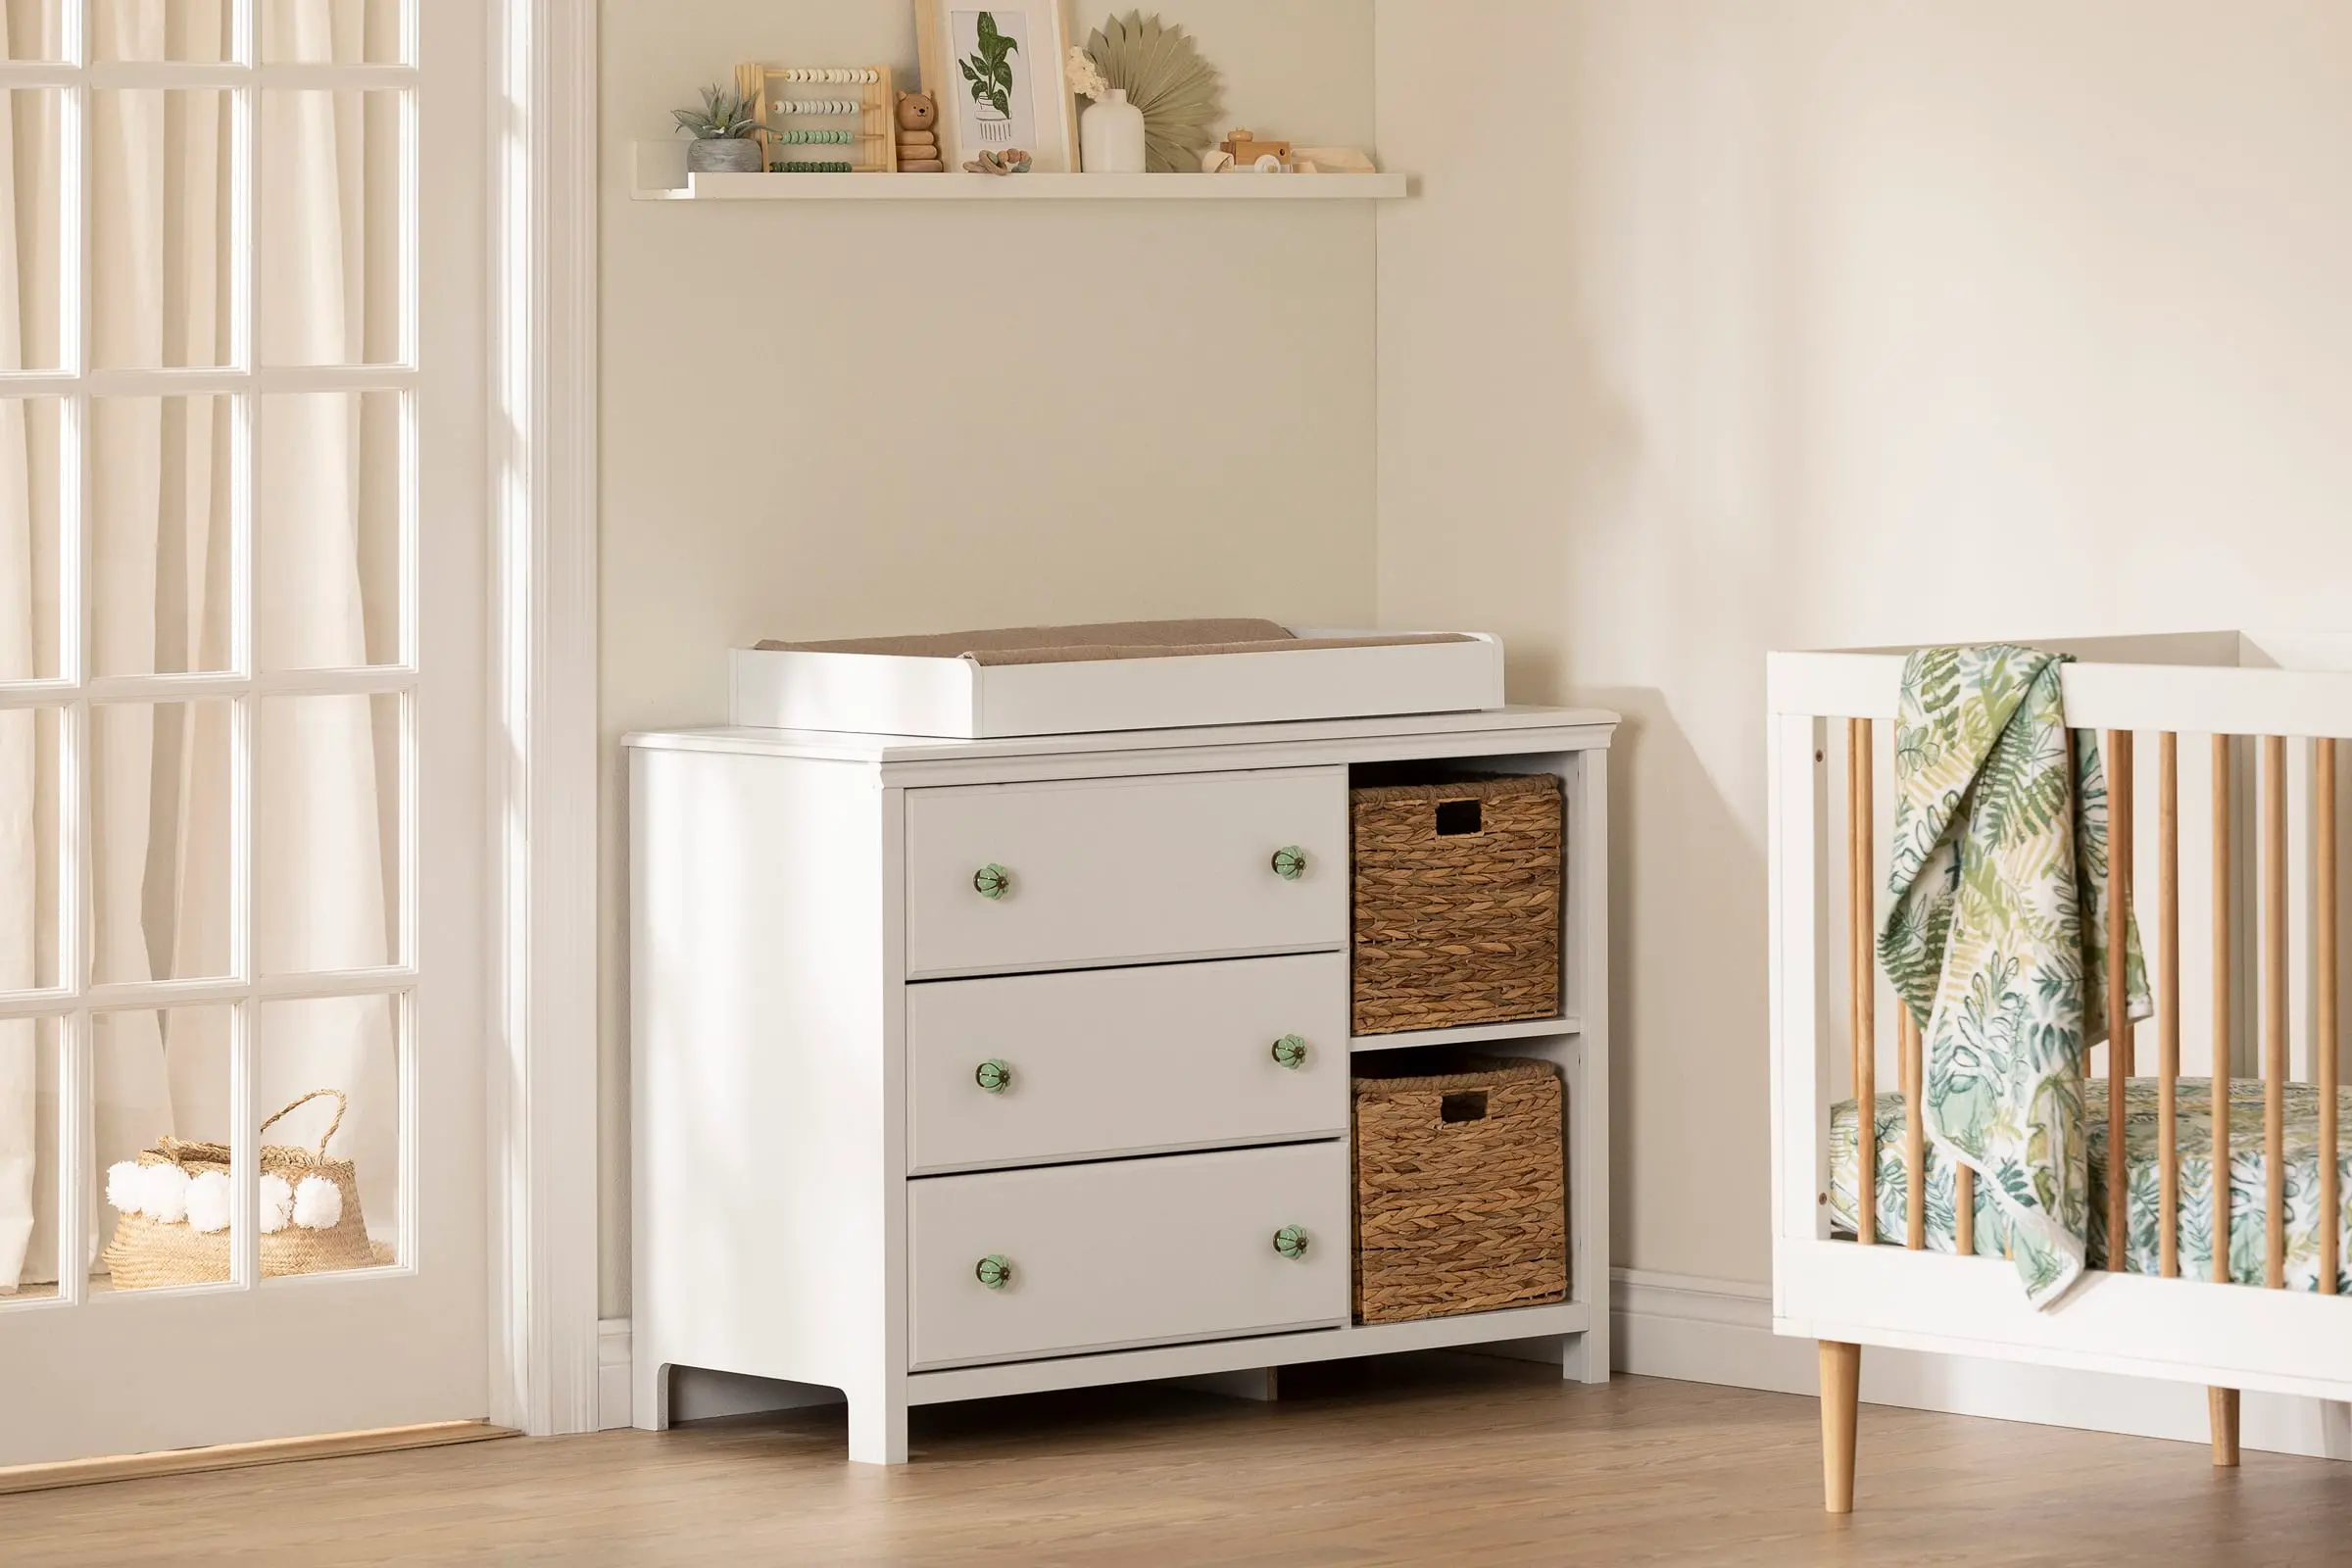 Balka White Changing Table Dresser - South Shore